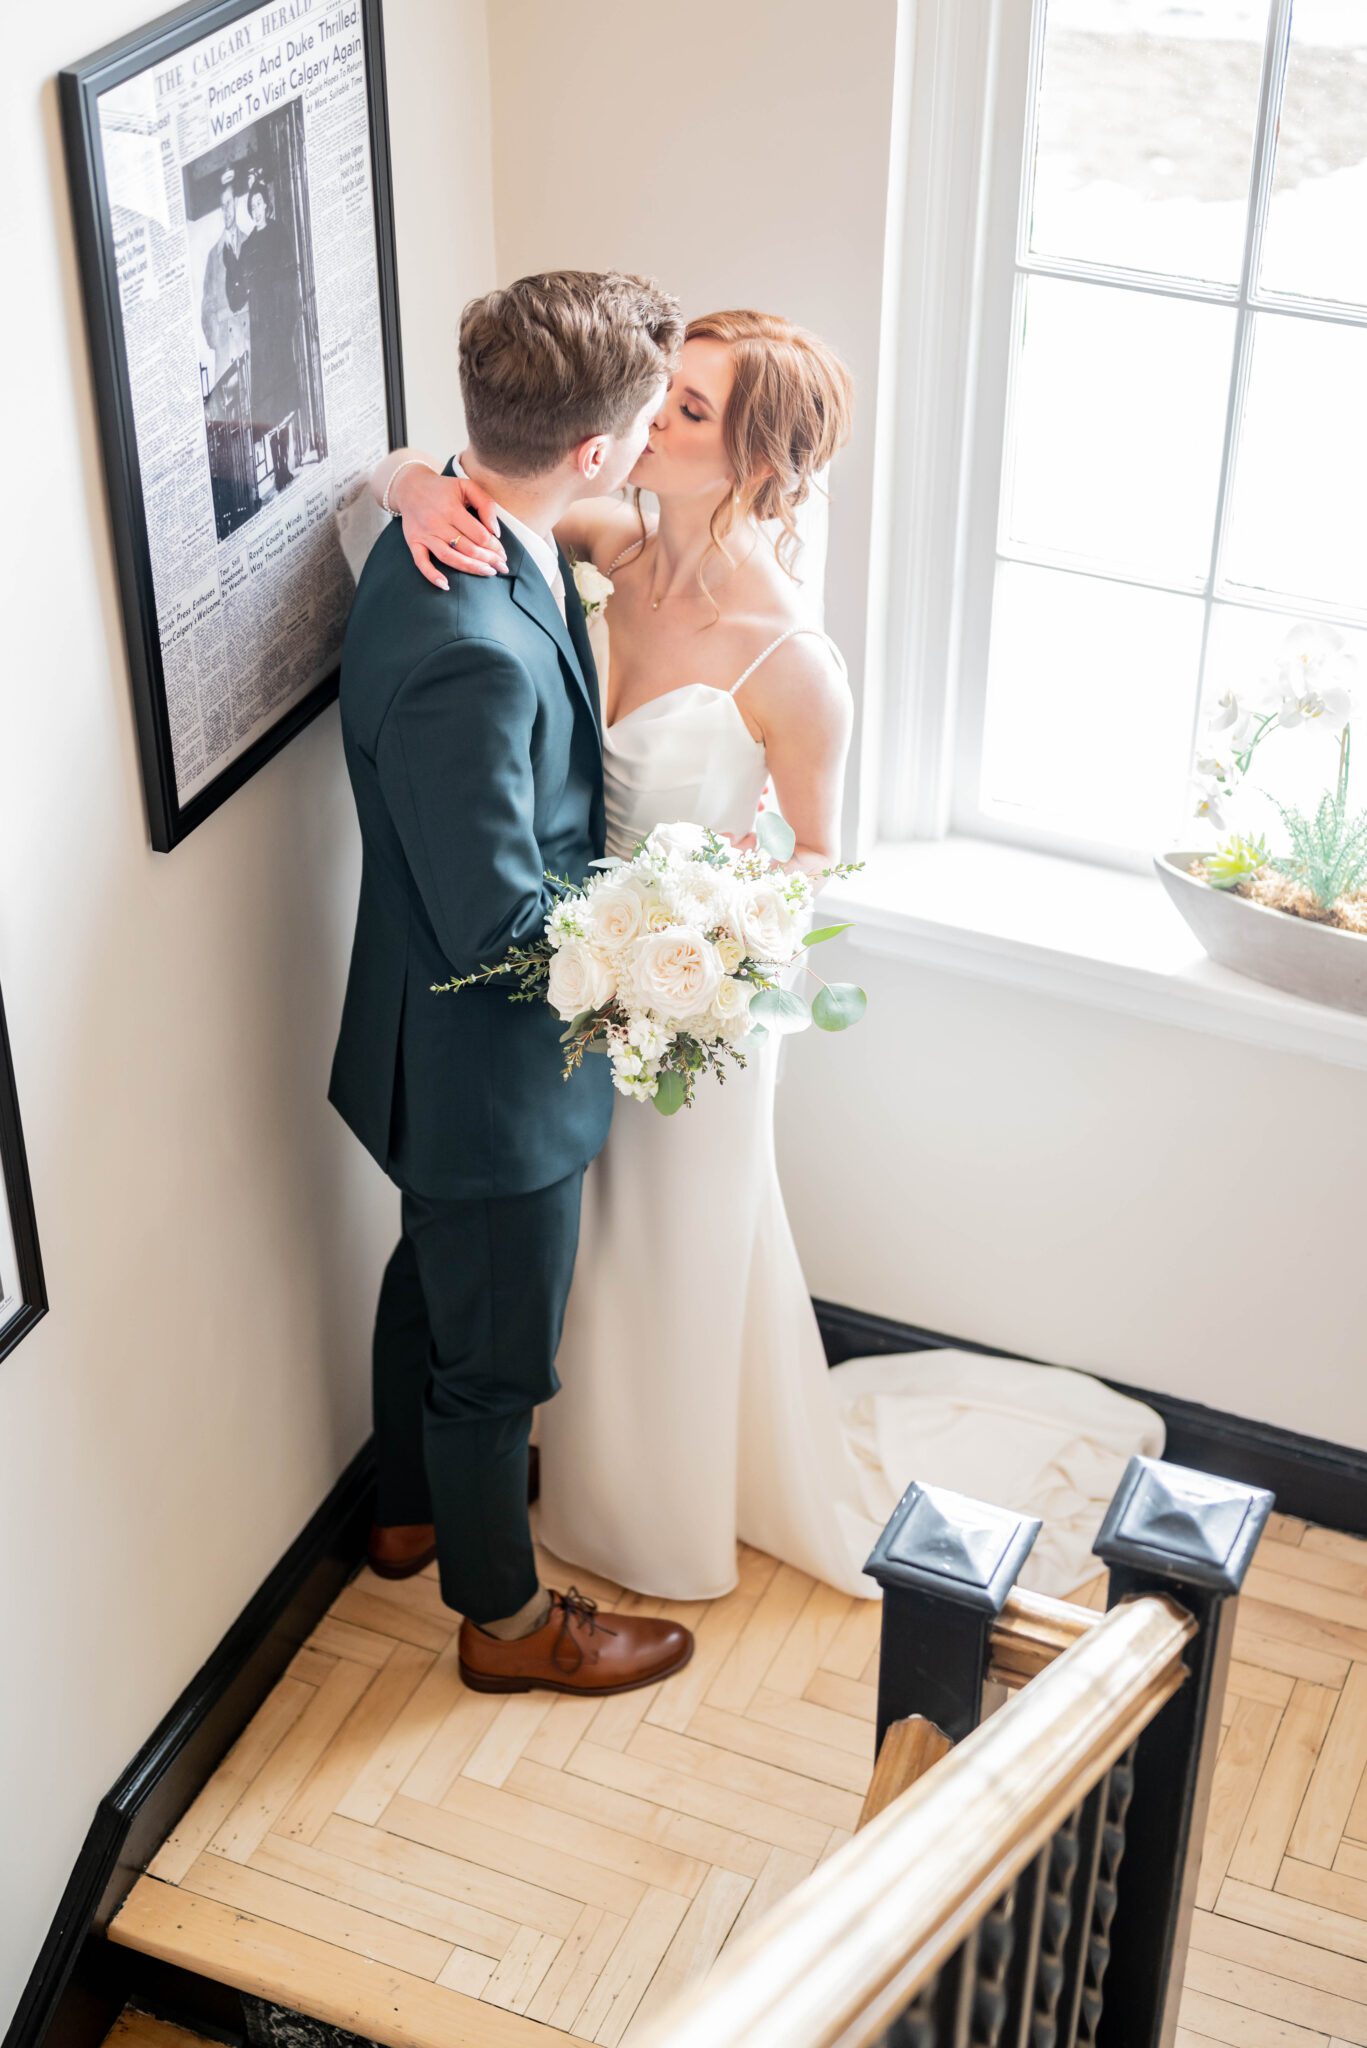 Bride and groom share a kiss in stairwell at the Inn on Officer's Garden wedding venue, bridal portrait inspiration, classic Calgary wedding inspiration. 